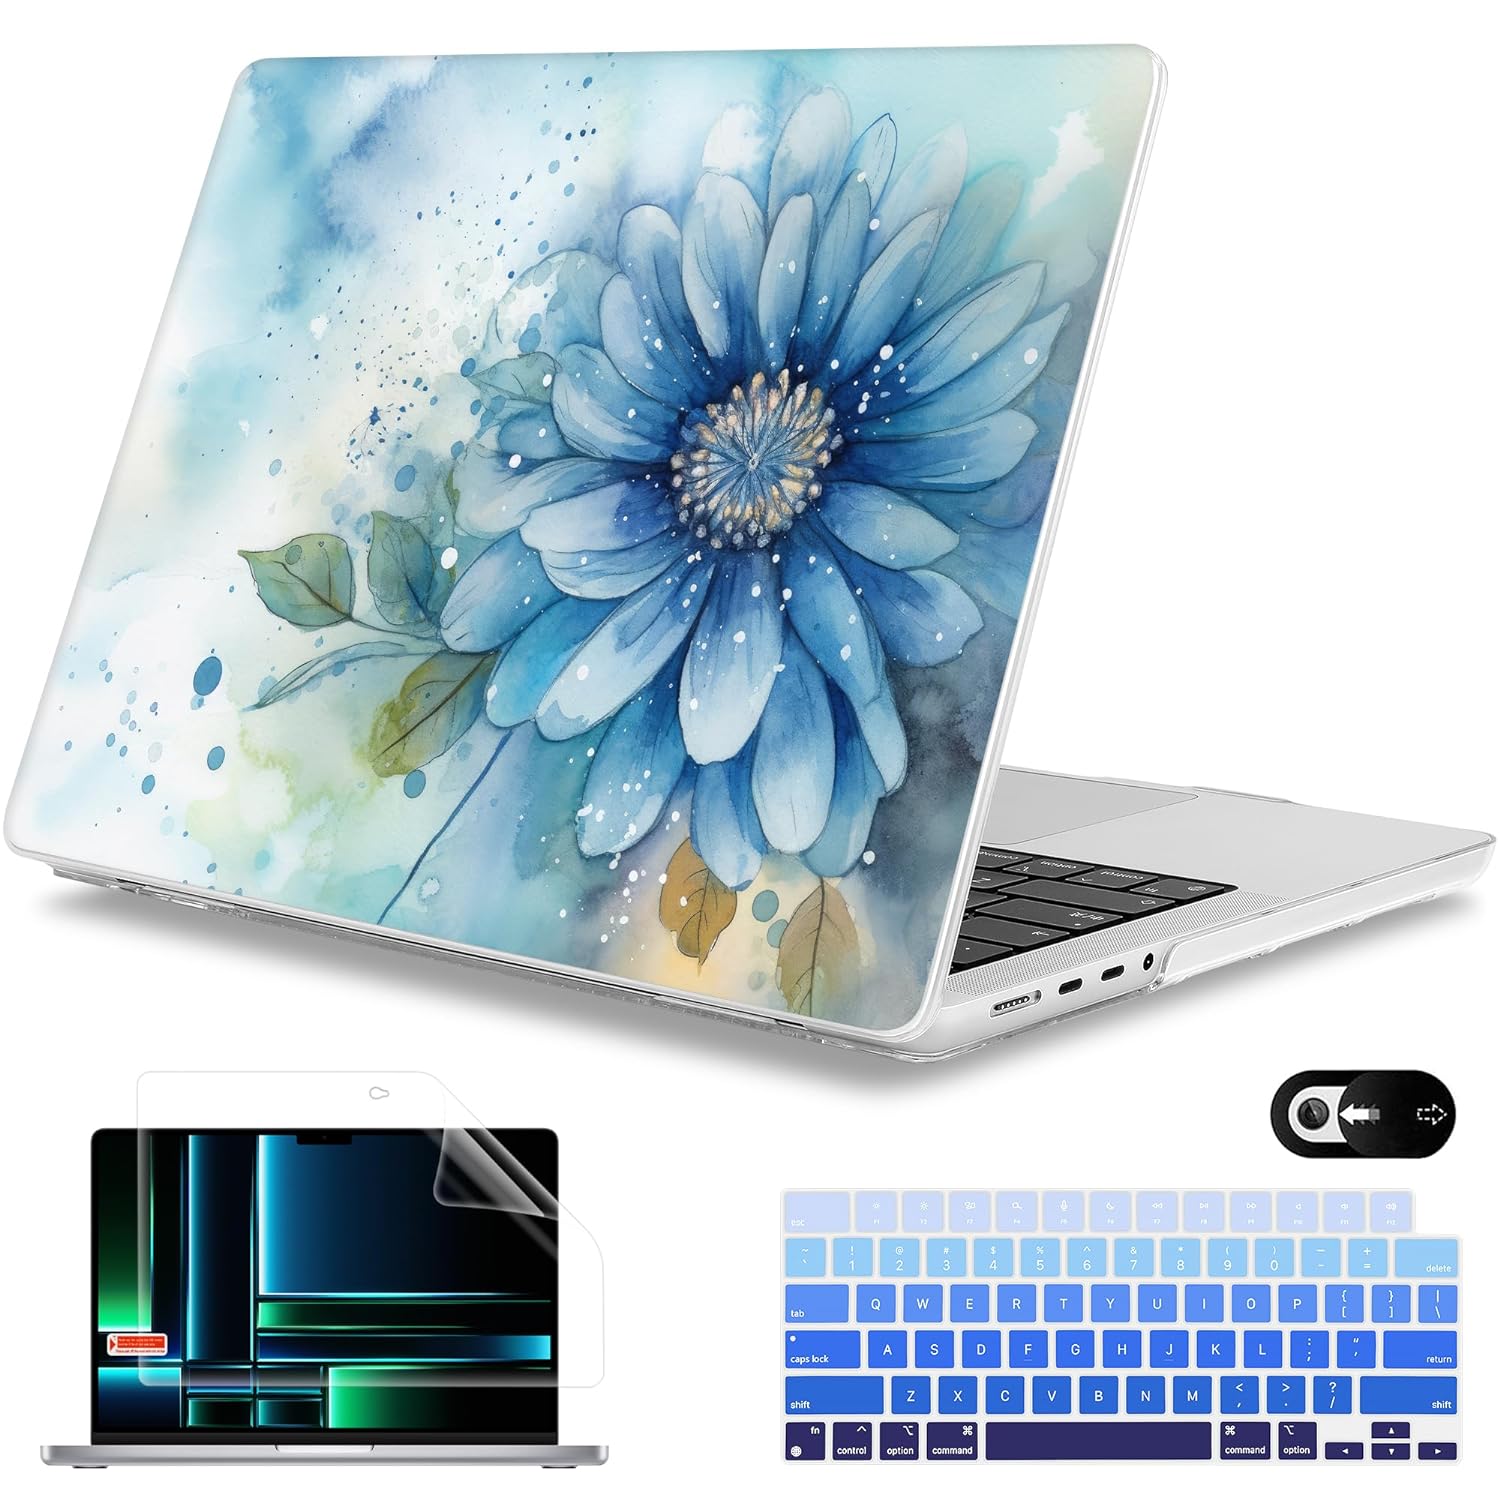 Mektron Case for M3 MacBook Pro 16" M1 A2485/M2 A2780 (2021/2023) with Touch ID, Hard Shell Plastic Laptop Cover Keyboard Skin Compatible MacBook Pro 16.2" M1 Pro/Max Chips, Watercolor Blue Flower